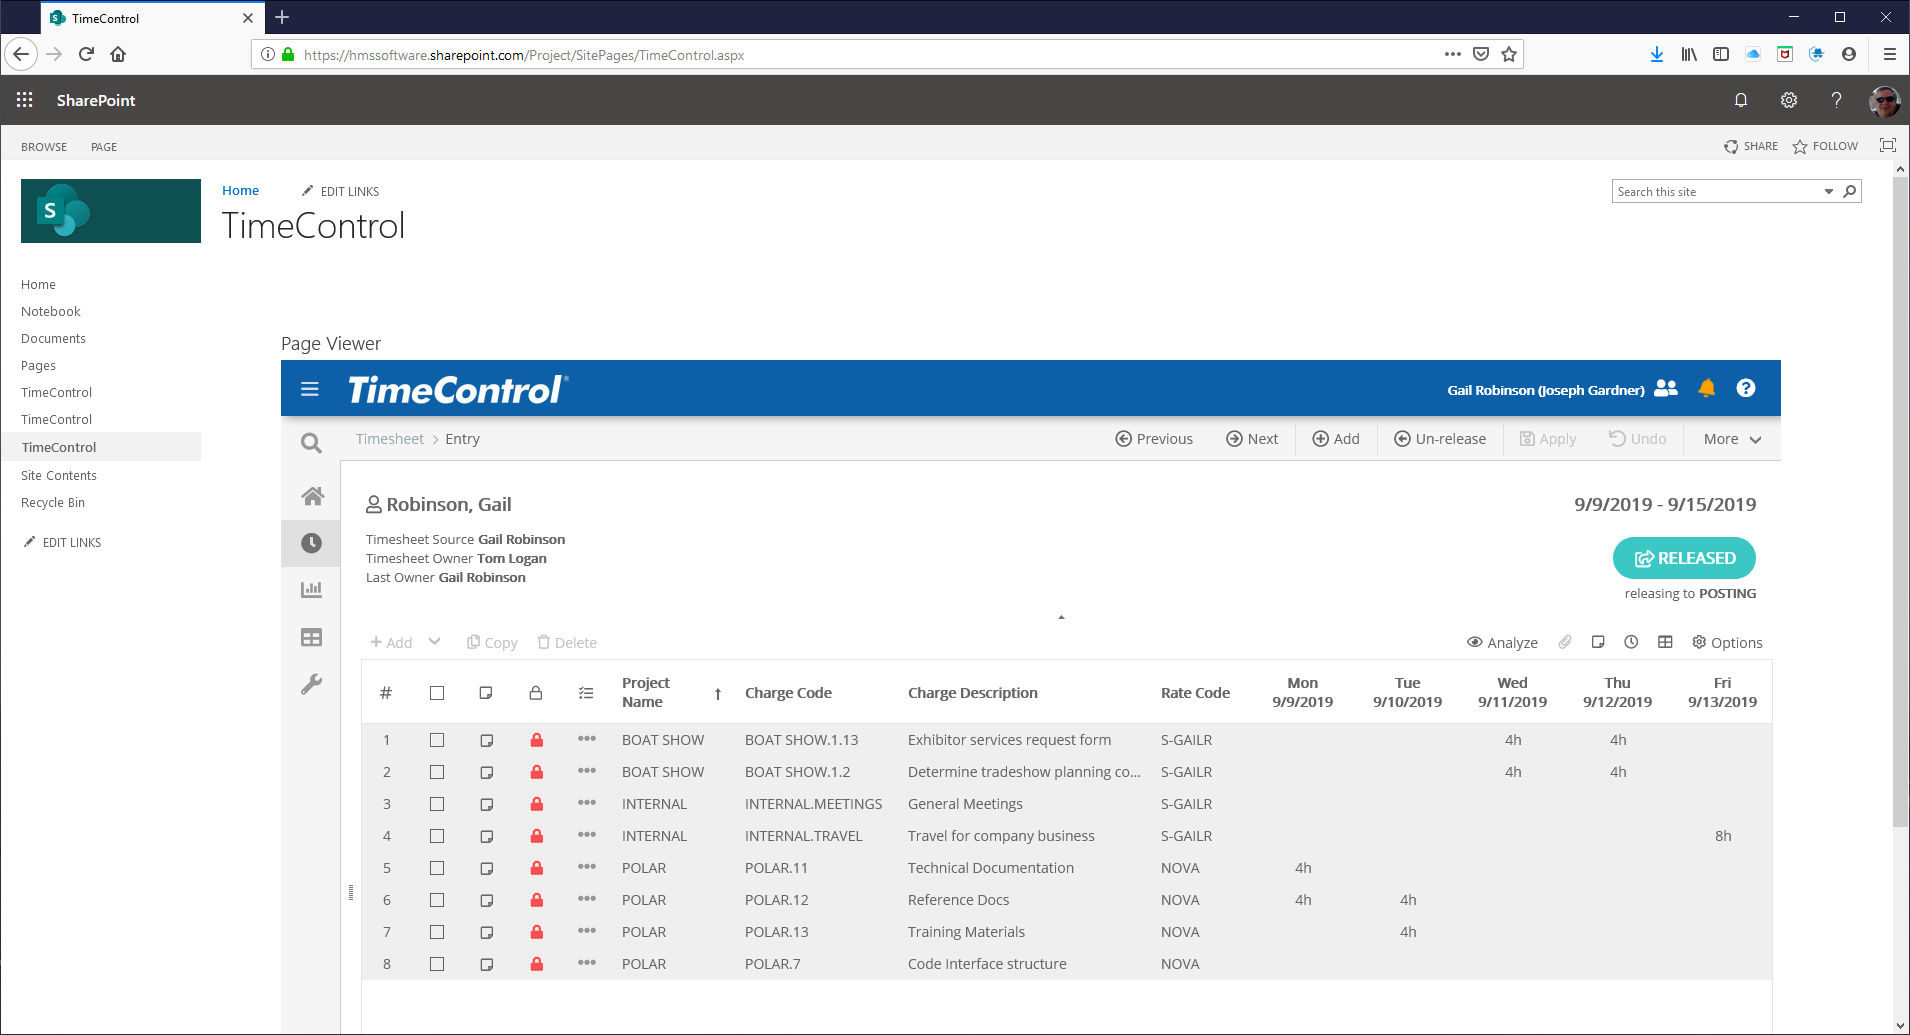 TimeControl Timesheet integrated within SharePoint